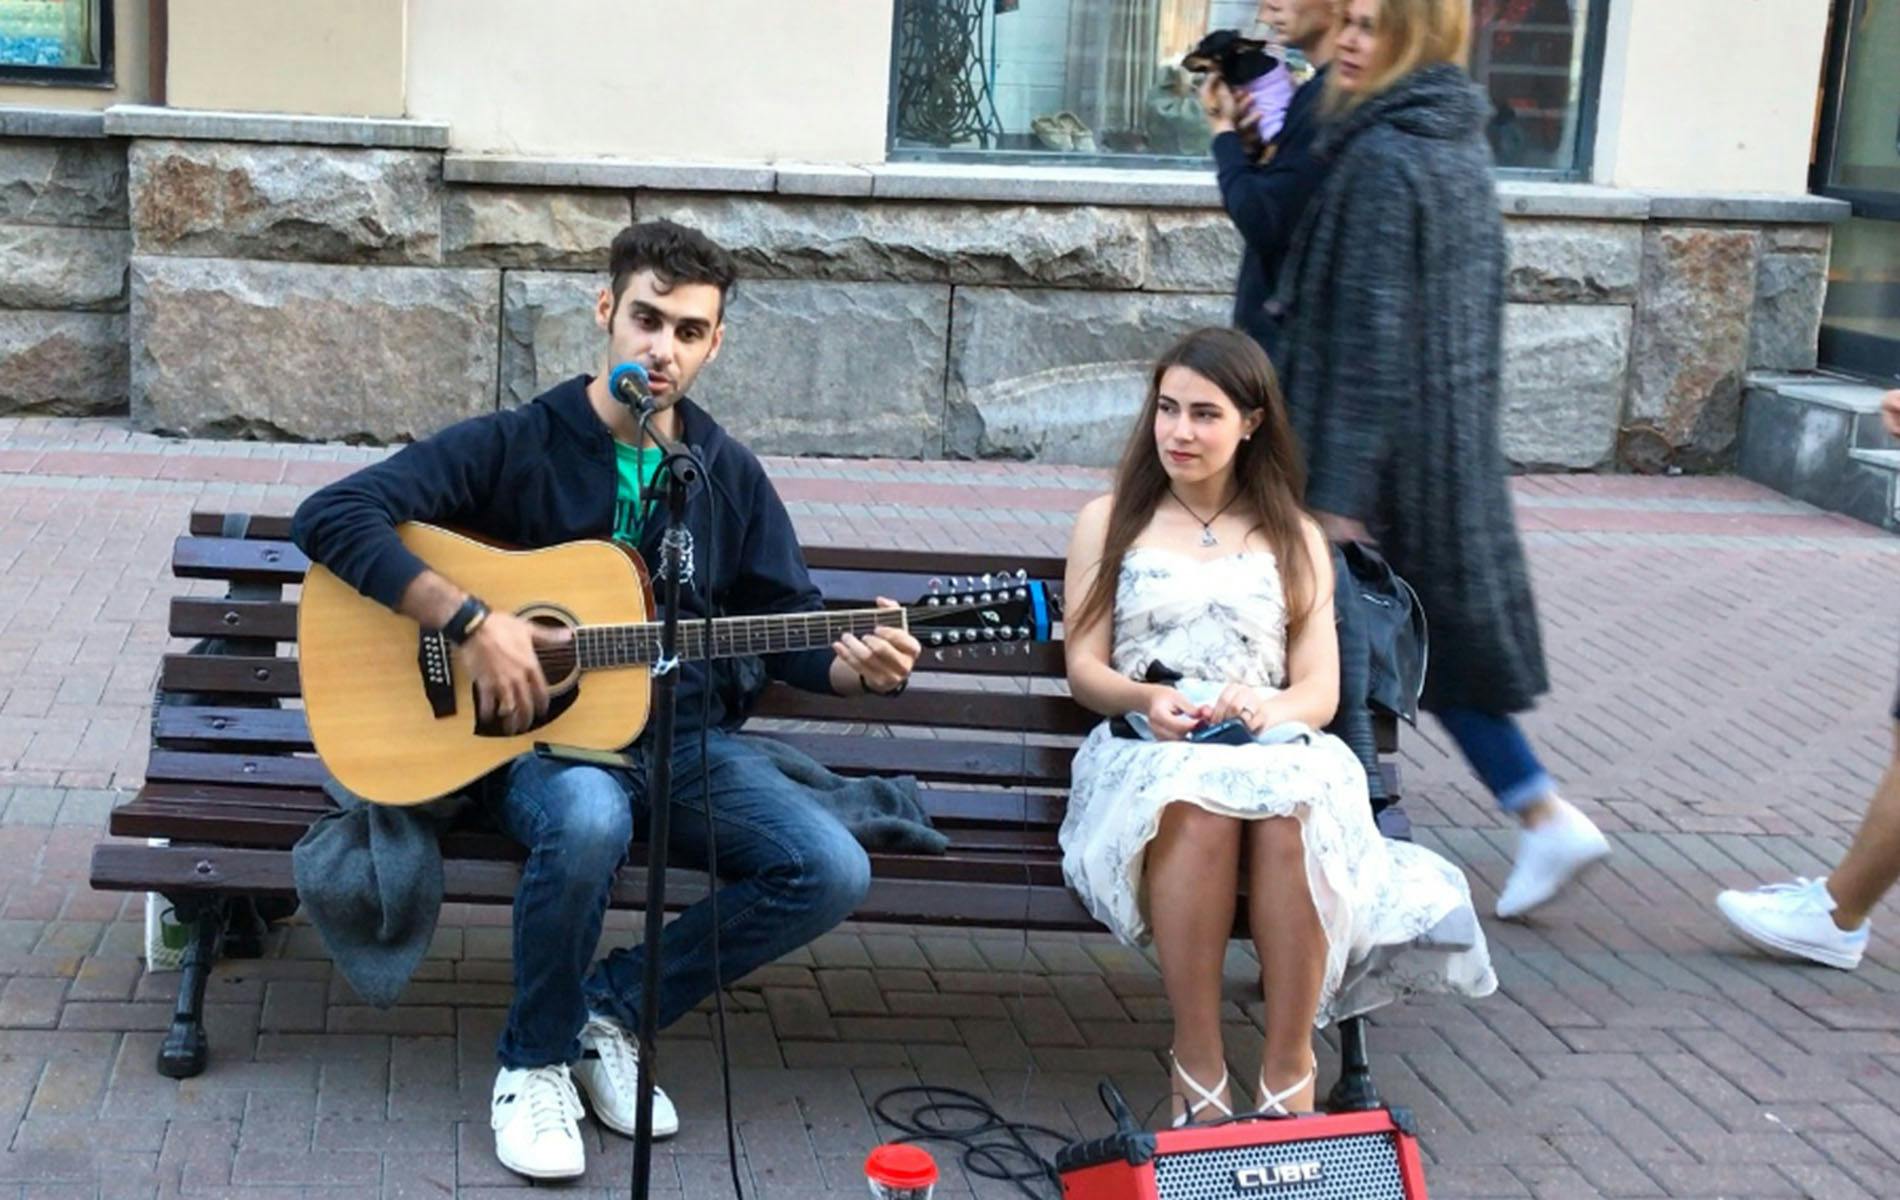 The story of playing guitar on Arbat Street; 30 days in Russia with 300$